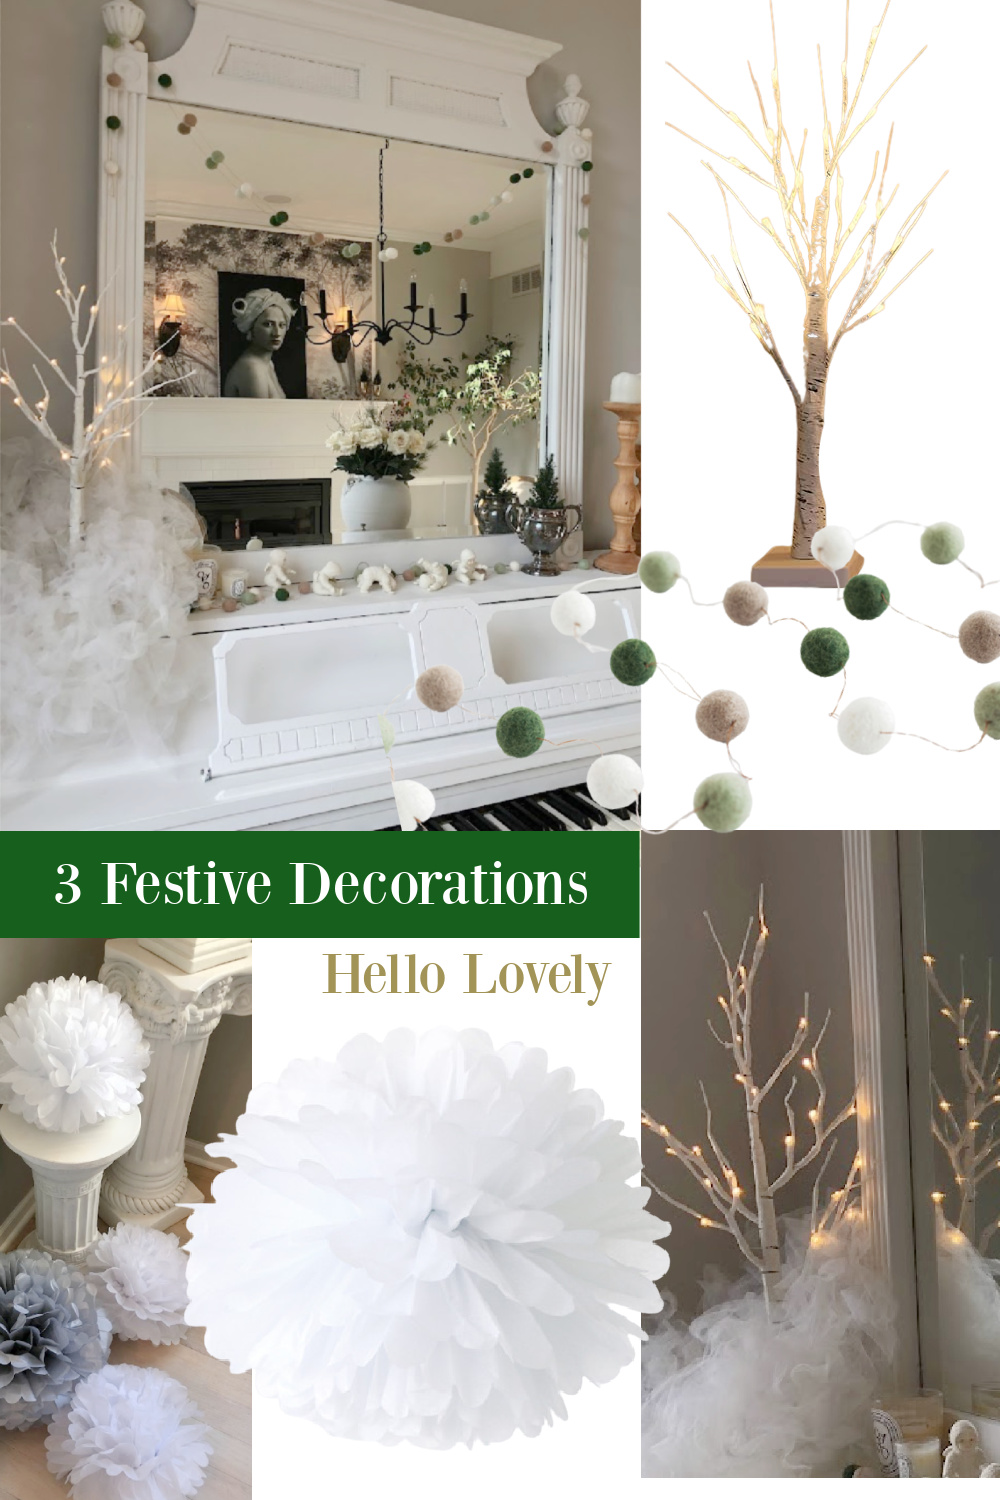 Festive Decorations for a Whimsical Christmas Look - Hello Lovely Studio. #whimsicalchristmas #holidaydecorations